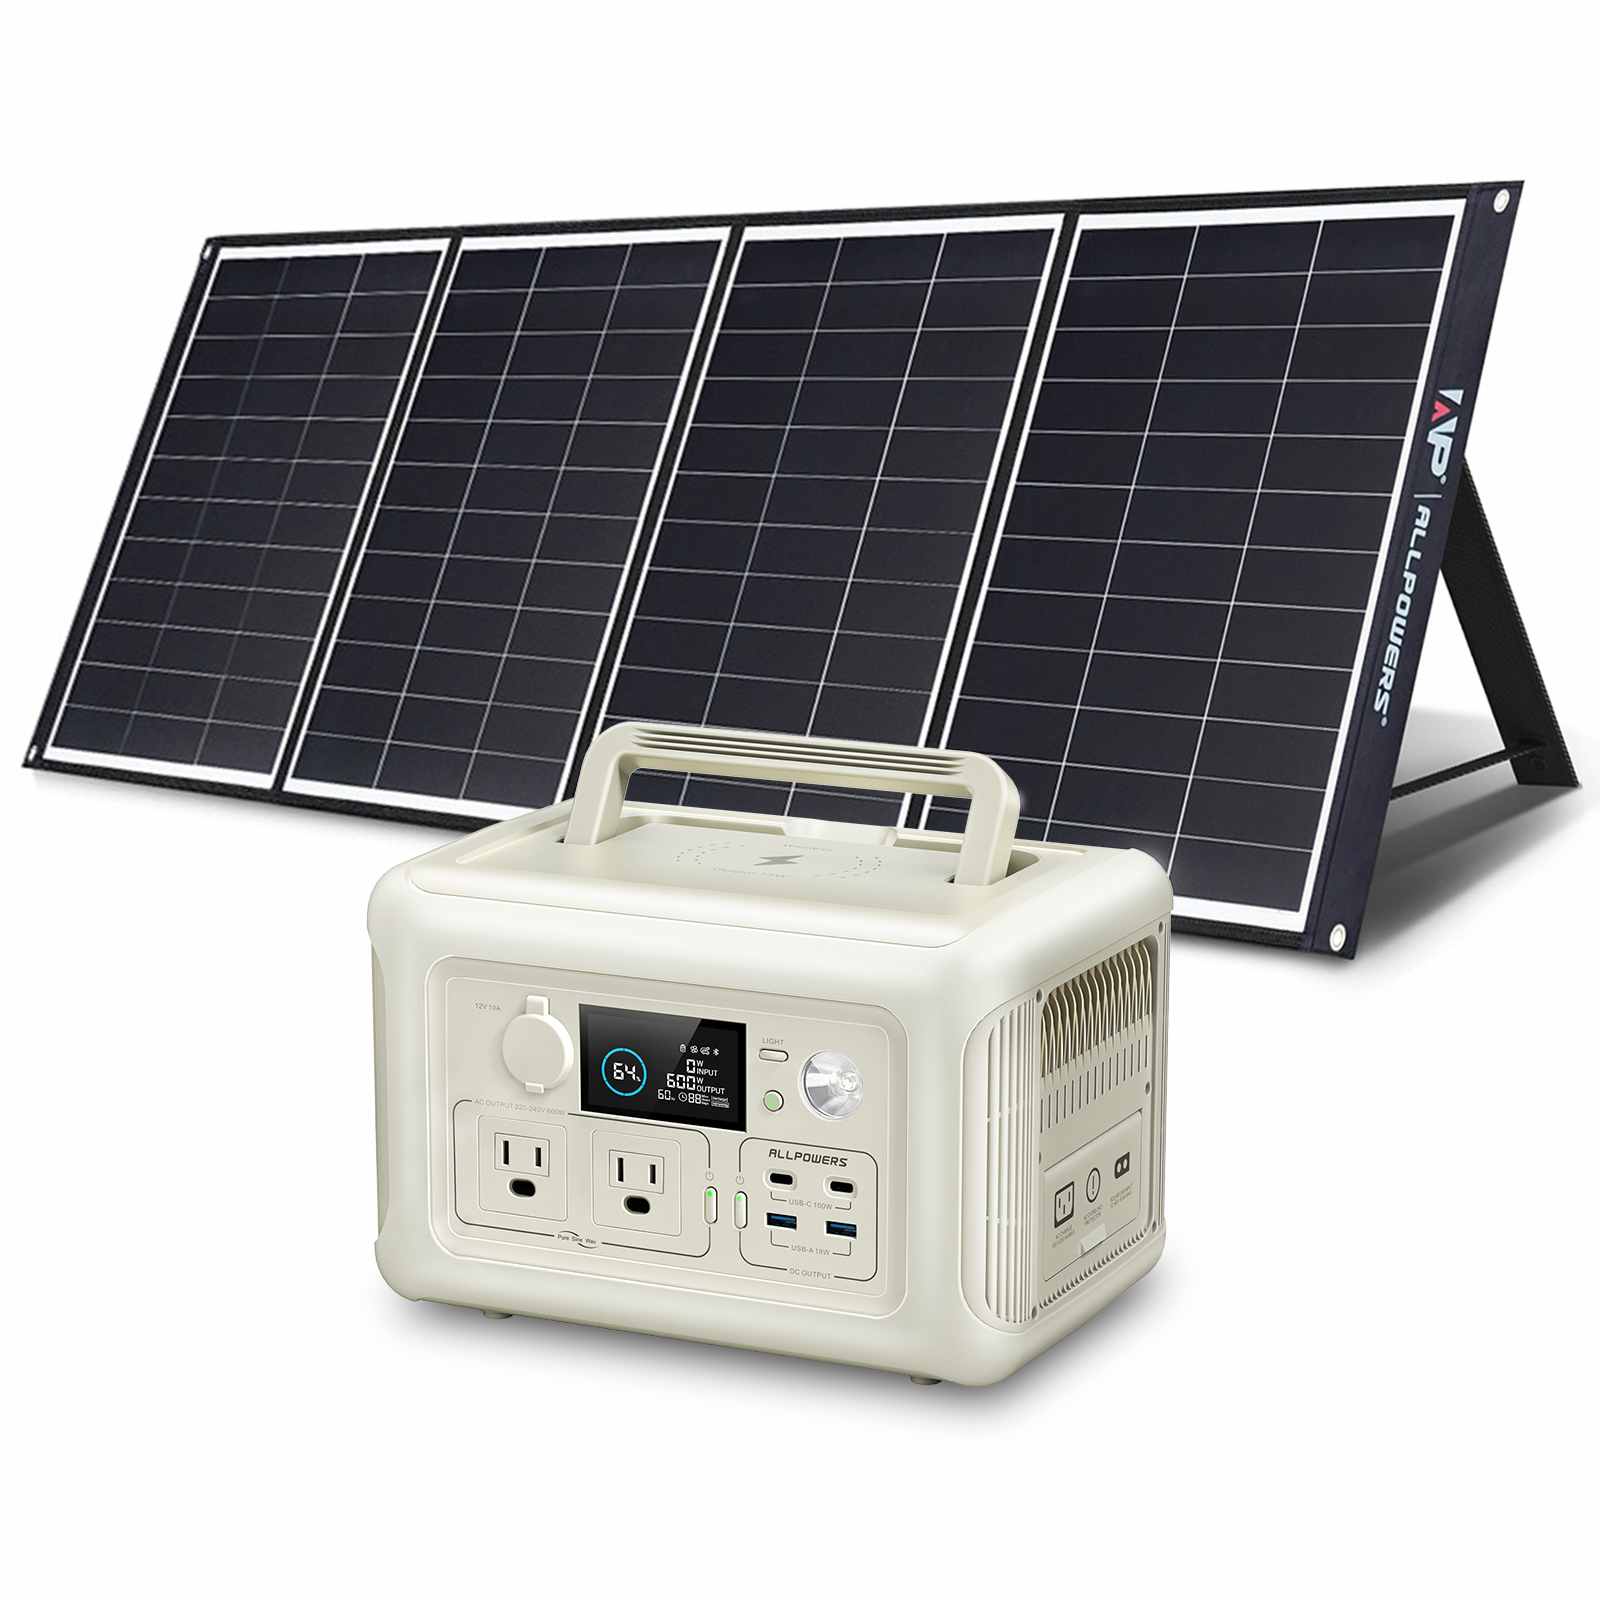 ALLPOWERS R600 Portable Power Station 600W 299Wh LiFeP04 Battery (R600 Beige + SP035 200W Solar Panel)